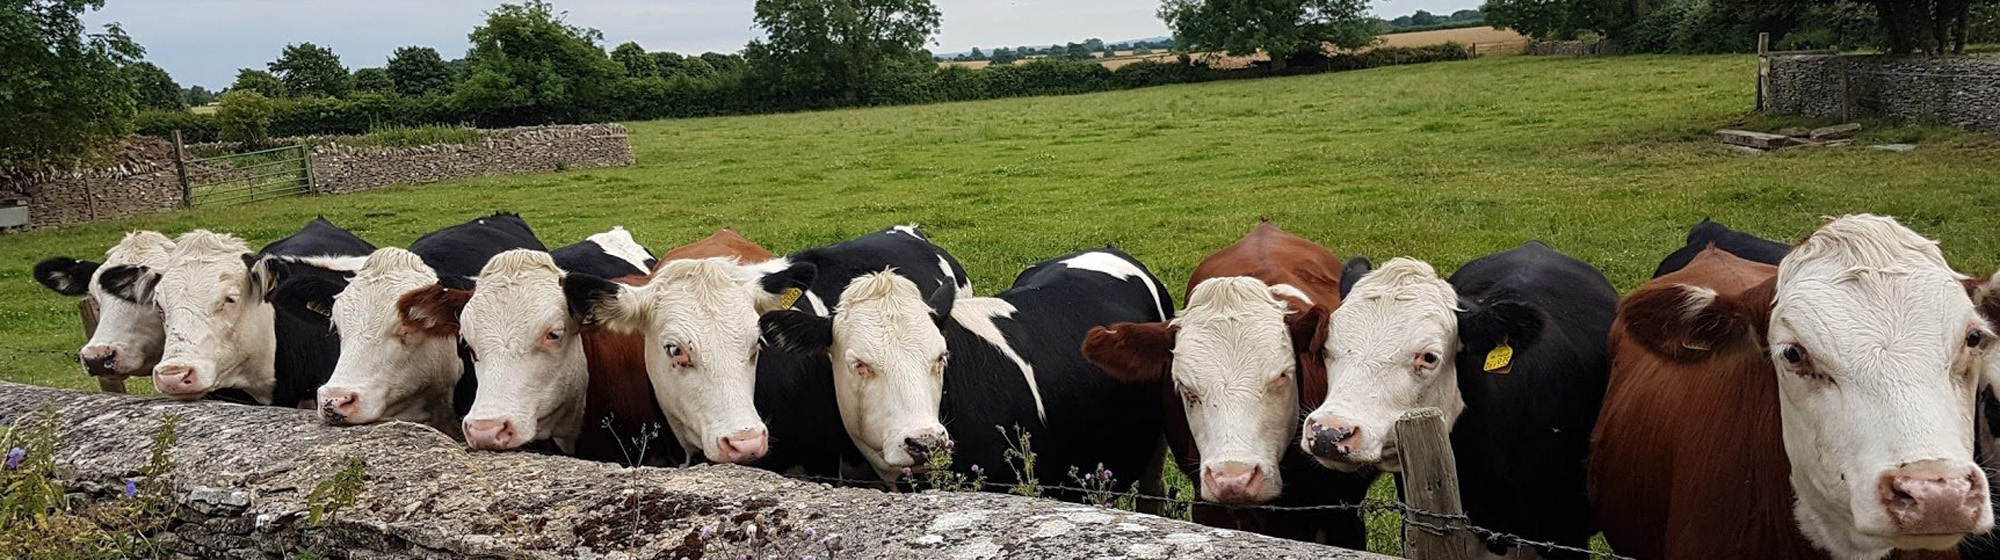 Cows in the Cotswolds